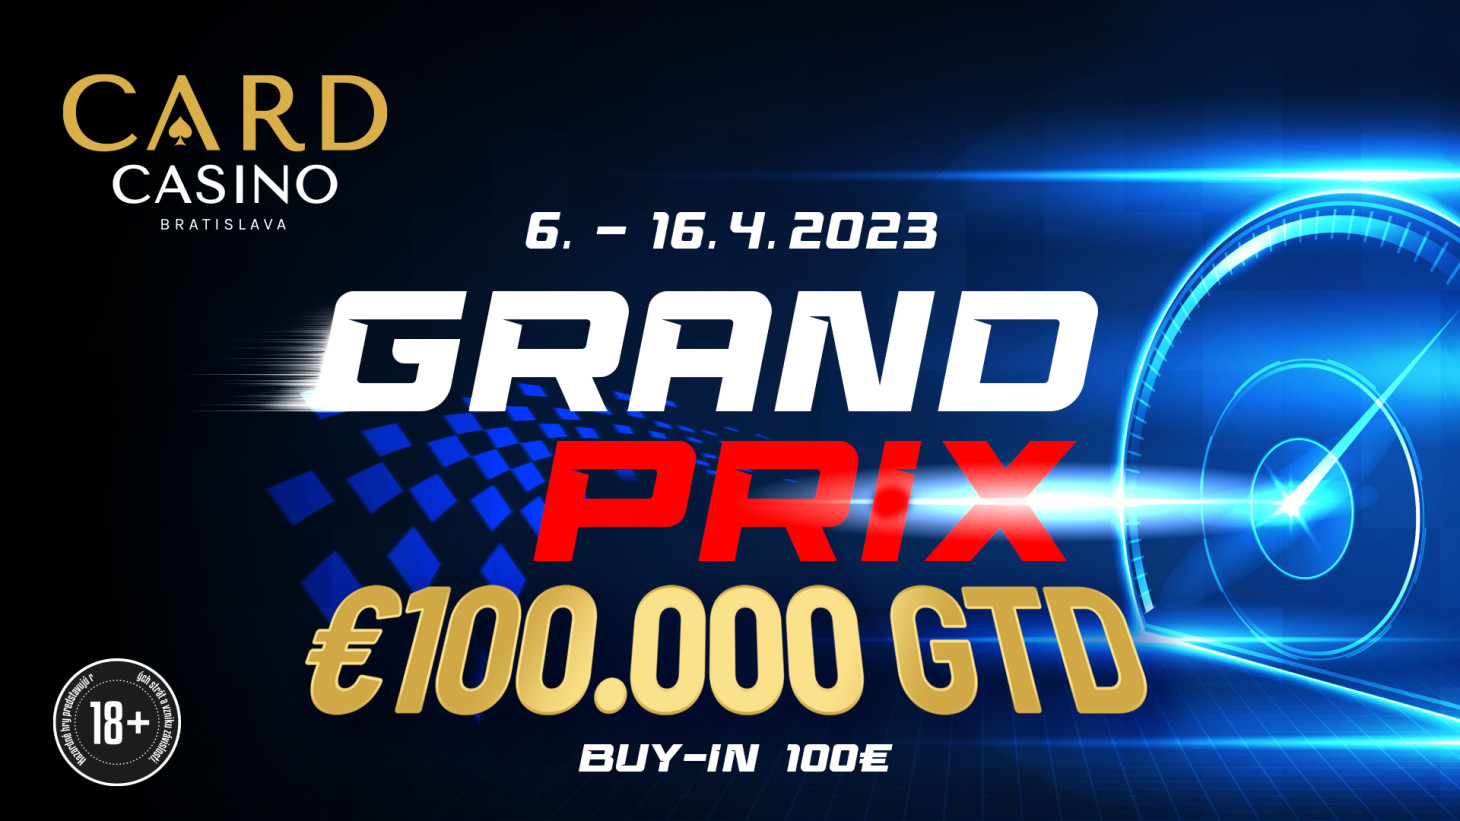 The €100,000 GTD Grand Prix gets underway after Easter